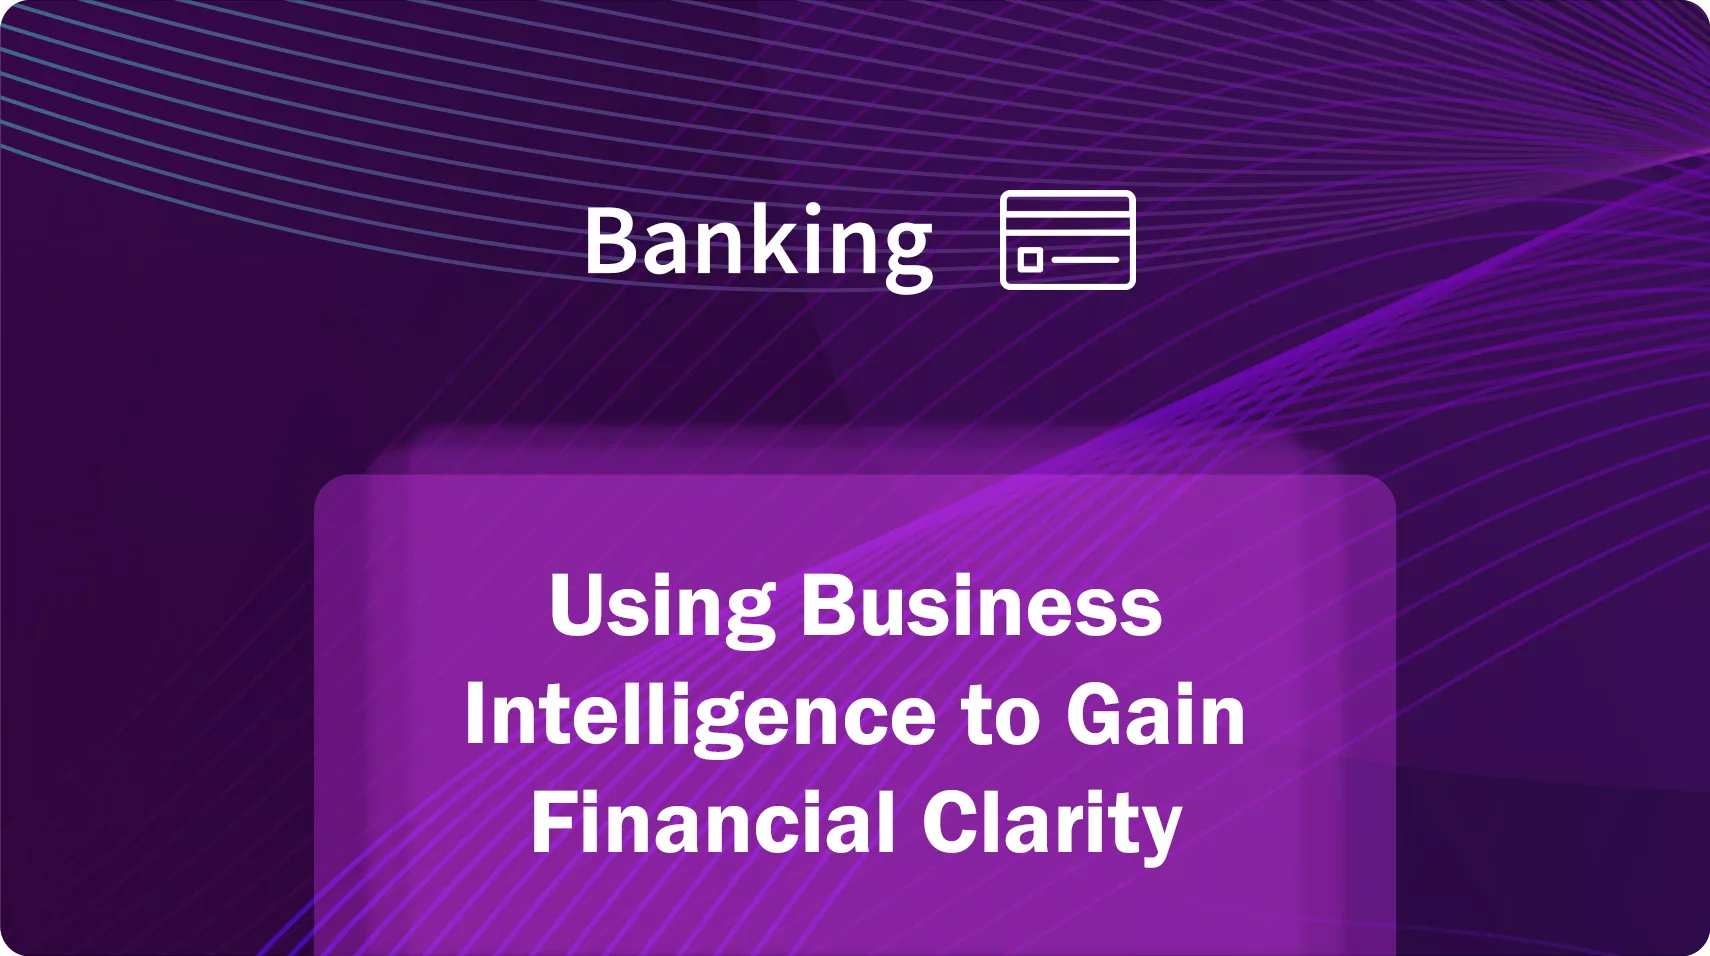 Using Business Intelligence to gain financial clarity